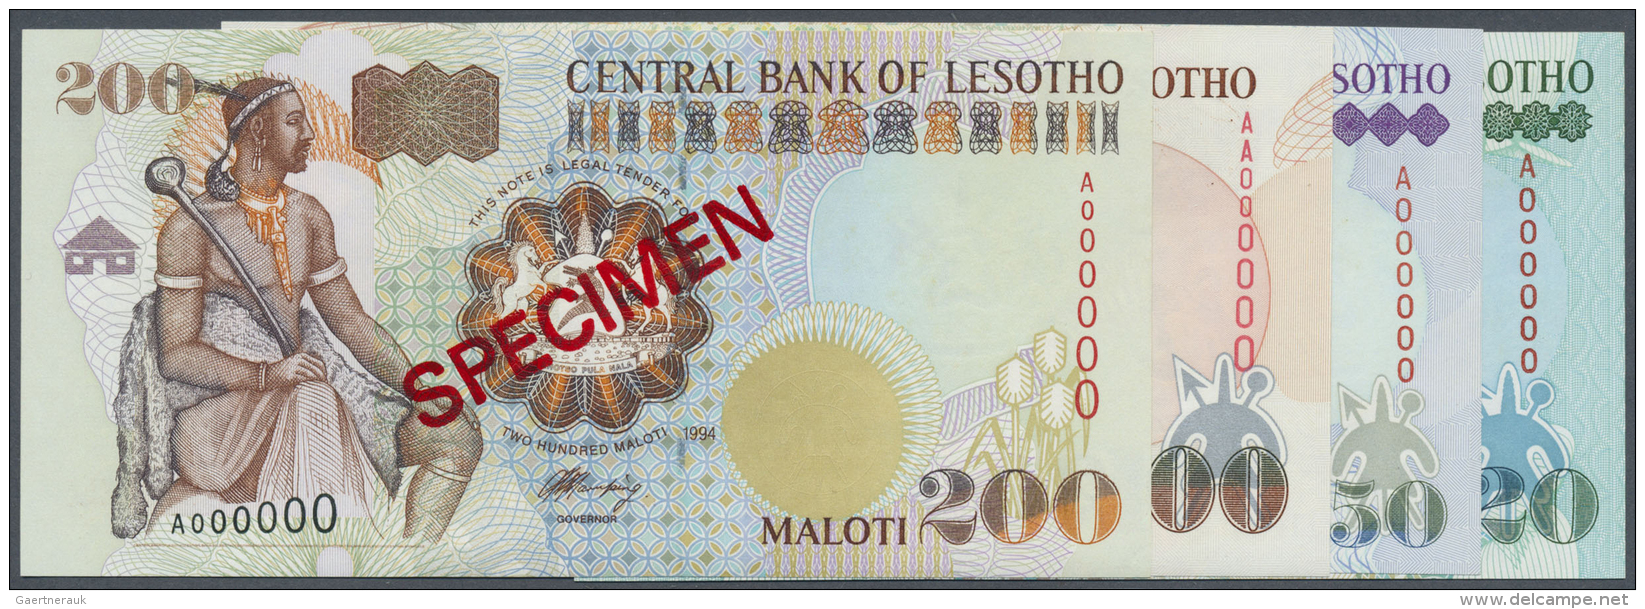 Lesotho: Set Of 4 Specimen Banknotes Containing 20, 50, 100 And 200 Maloti 1994 P. 16s-18s, 20s, All In Condition: UNC. - Lesoto